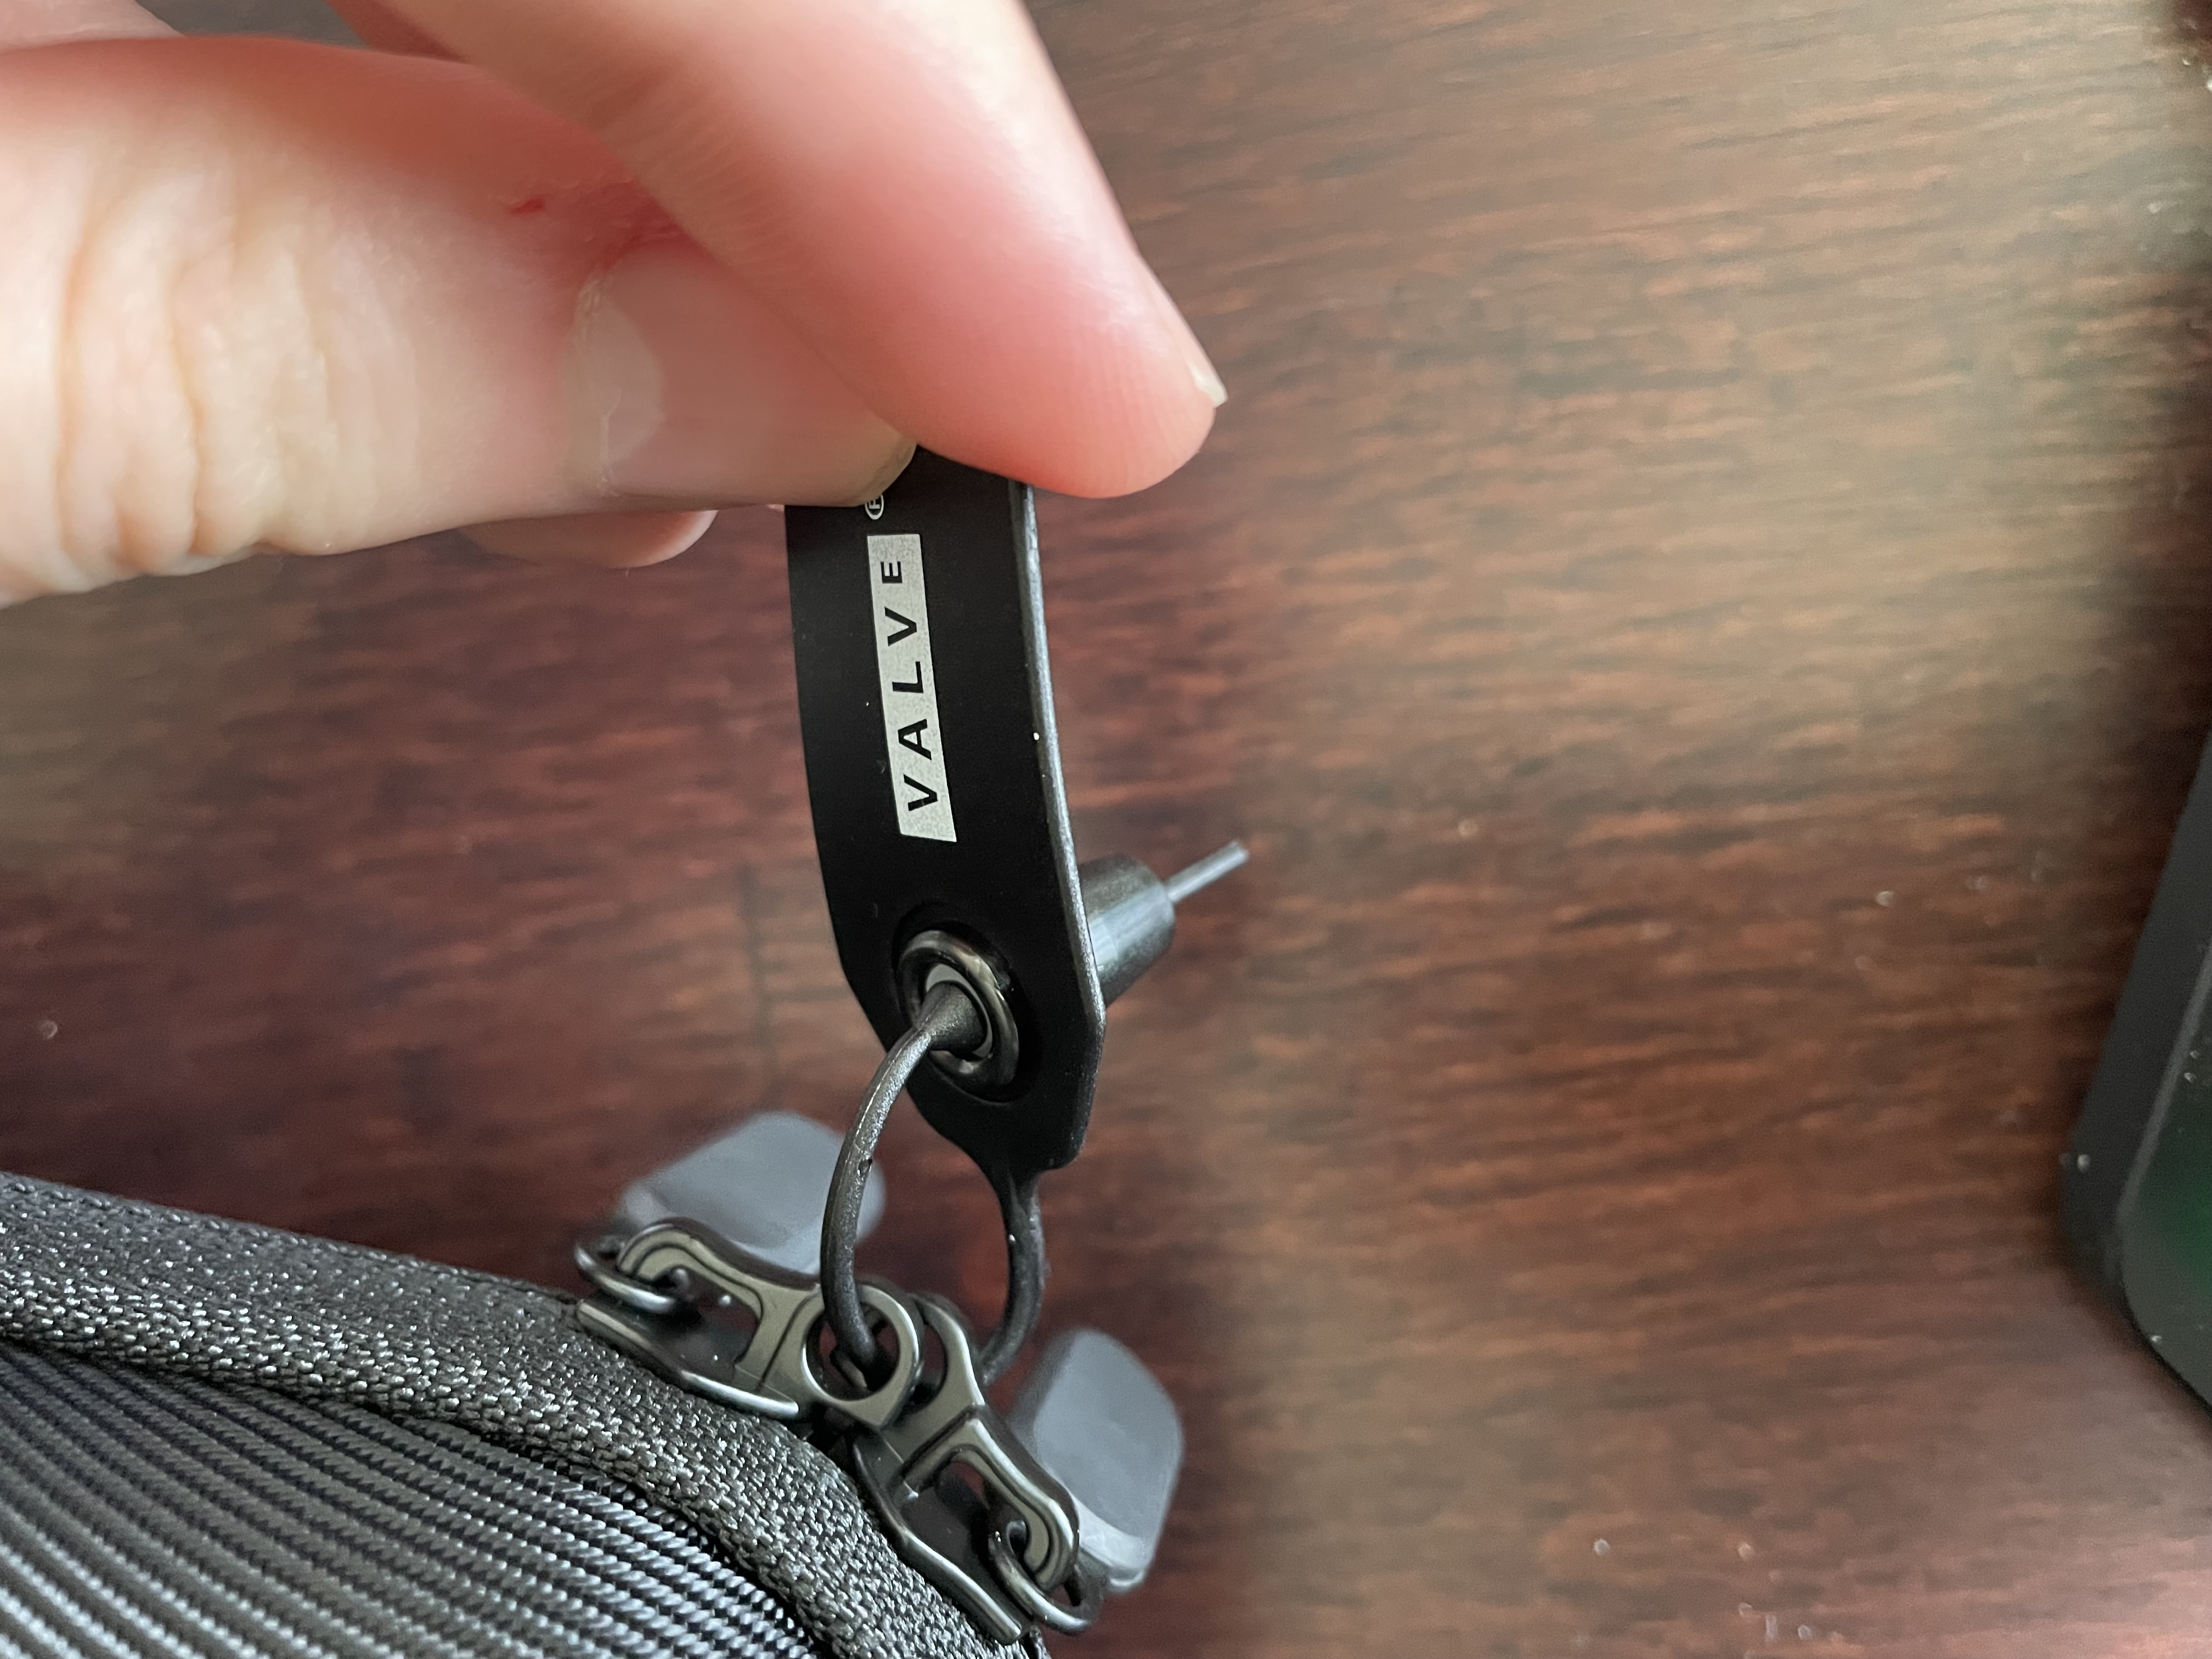 A Valve-branded tag which loops through and locks the case's zippers.